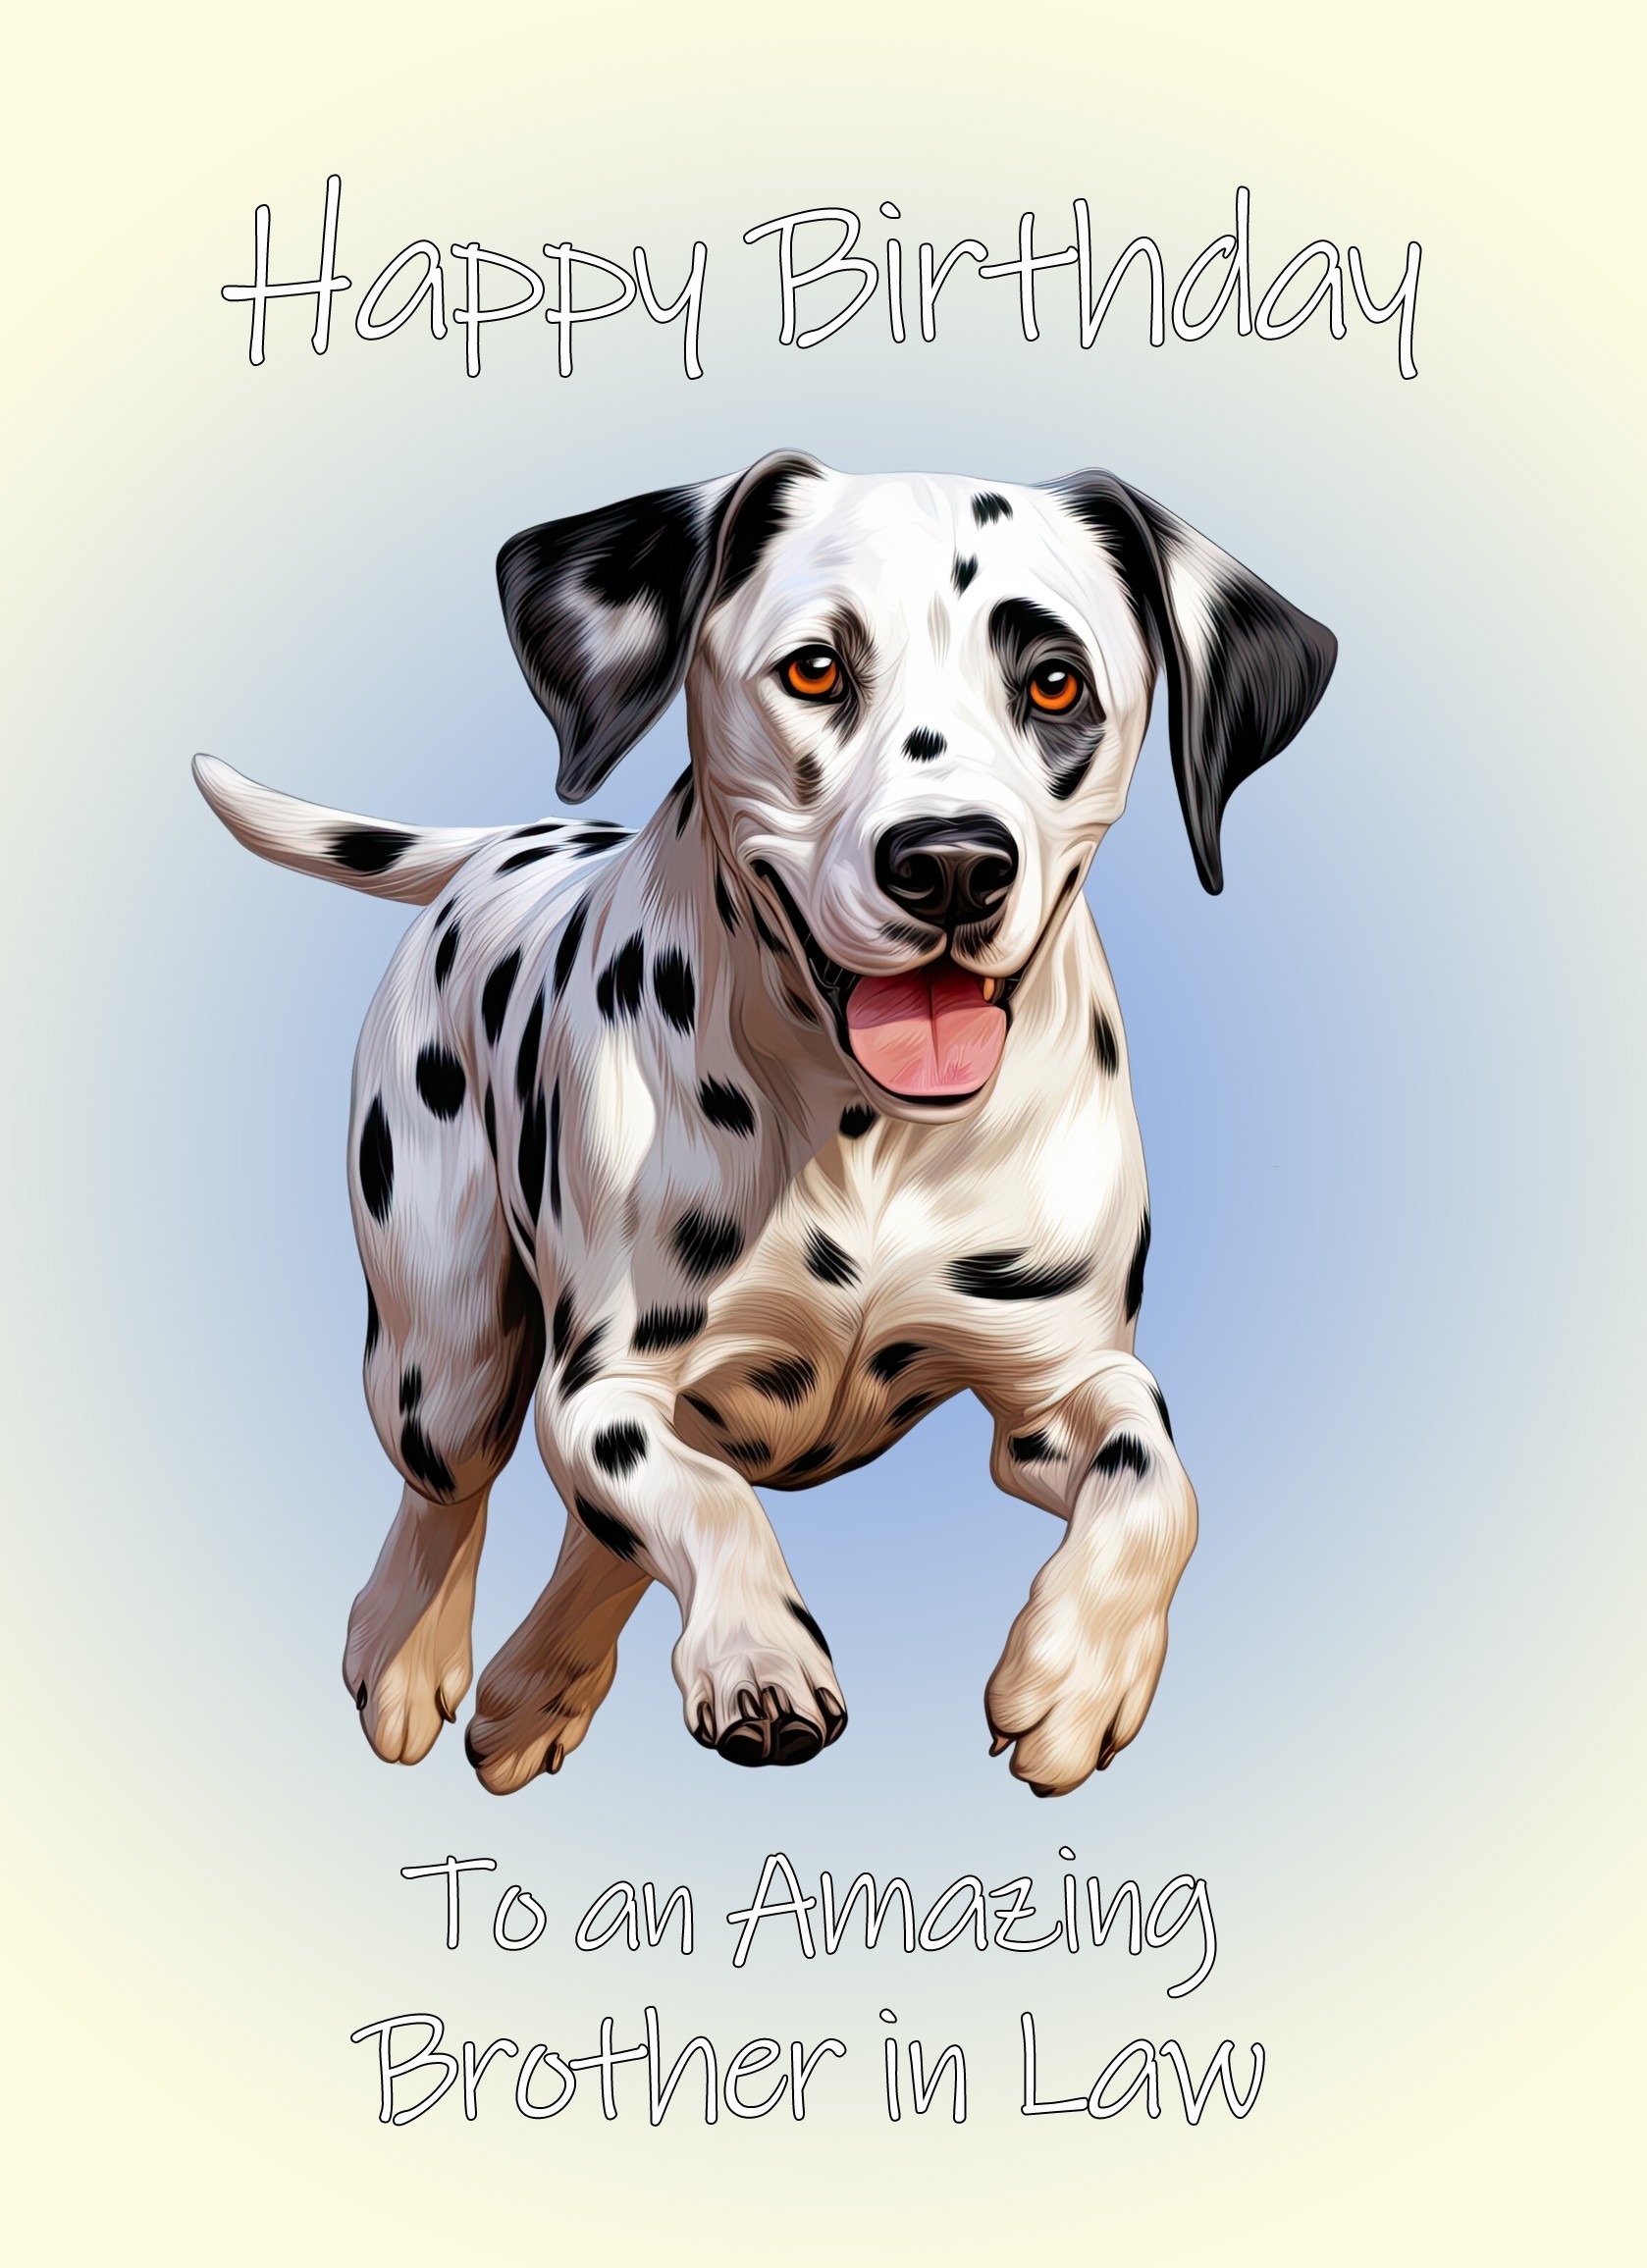 Dalmatian Dog Birthday Card For Brother in Law